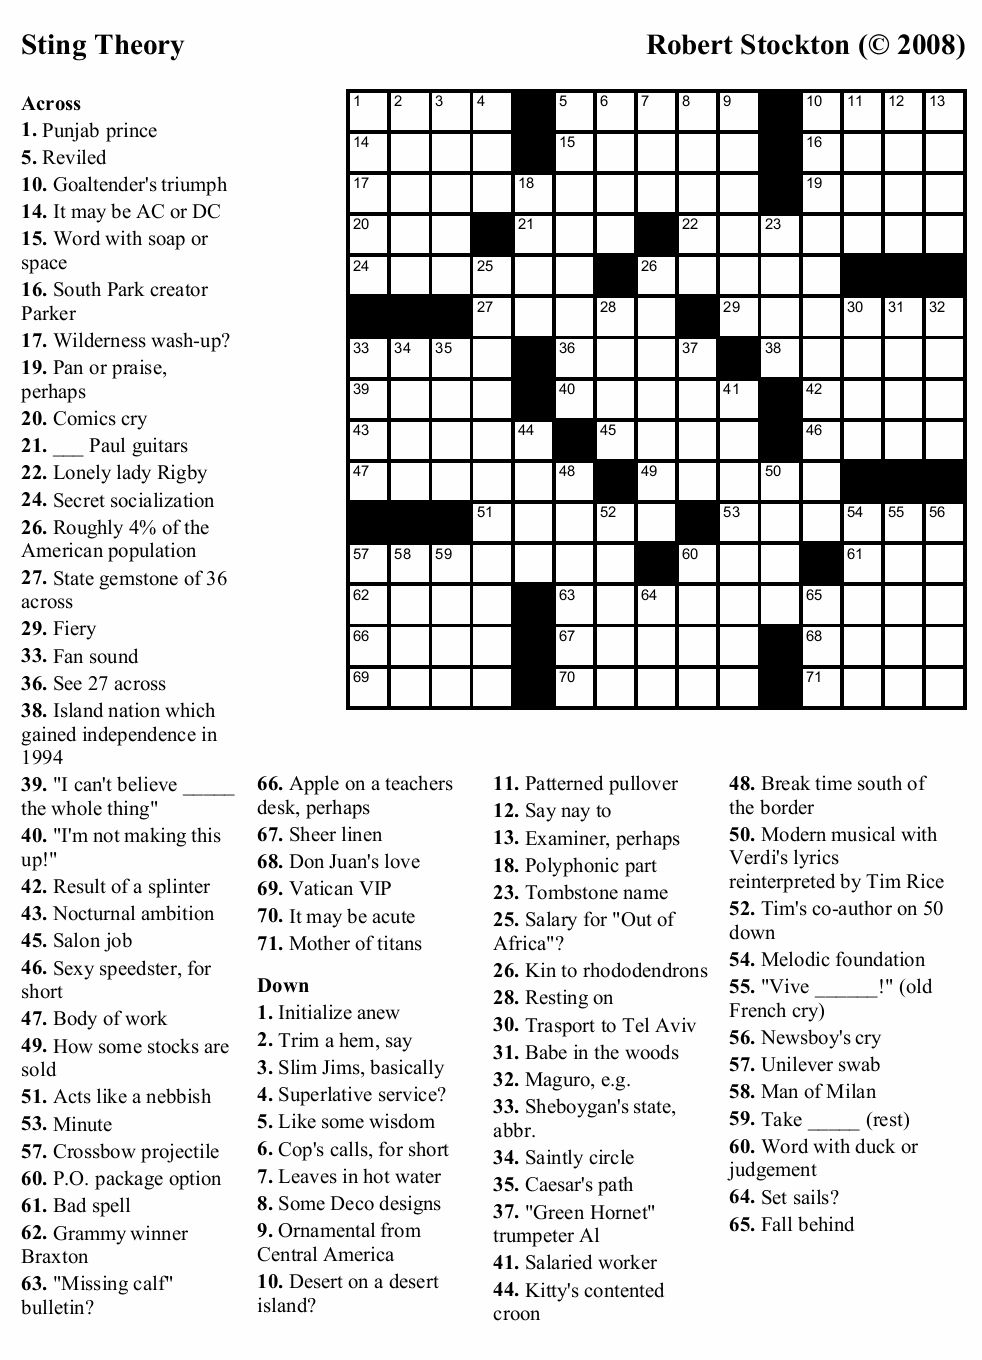 Printable Crossword Puzzles Nytimes | Printable Crossword Puzzles - Free Printable Nyt Crossword Puzzles